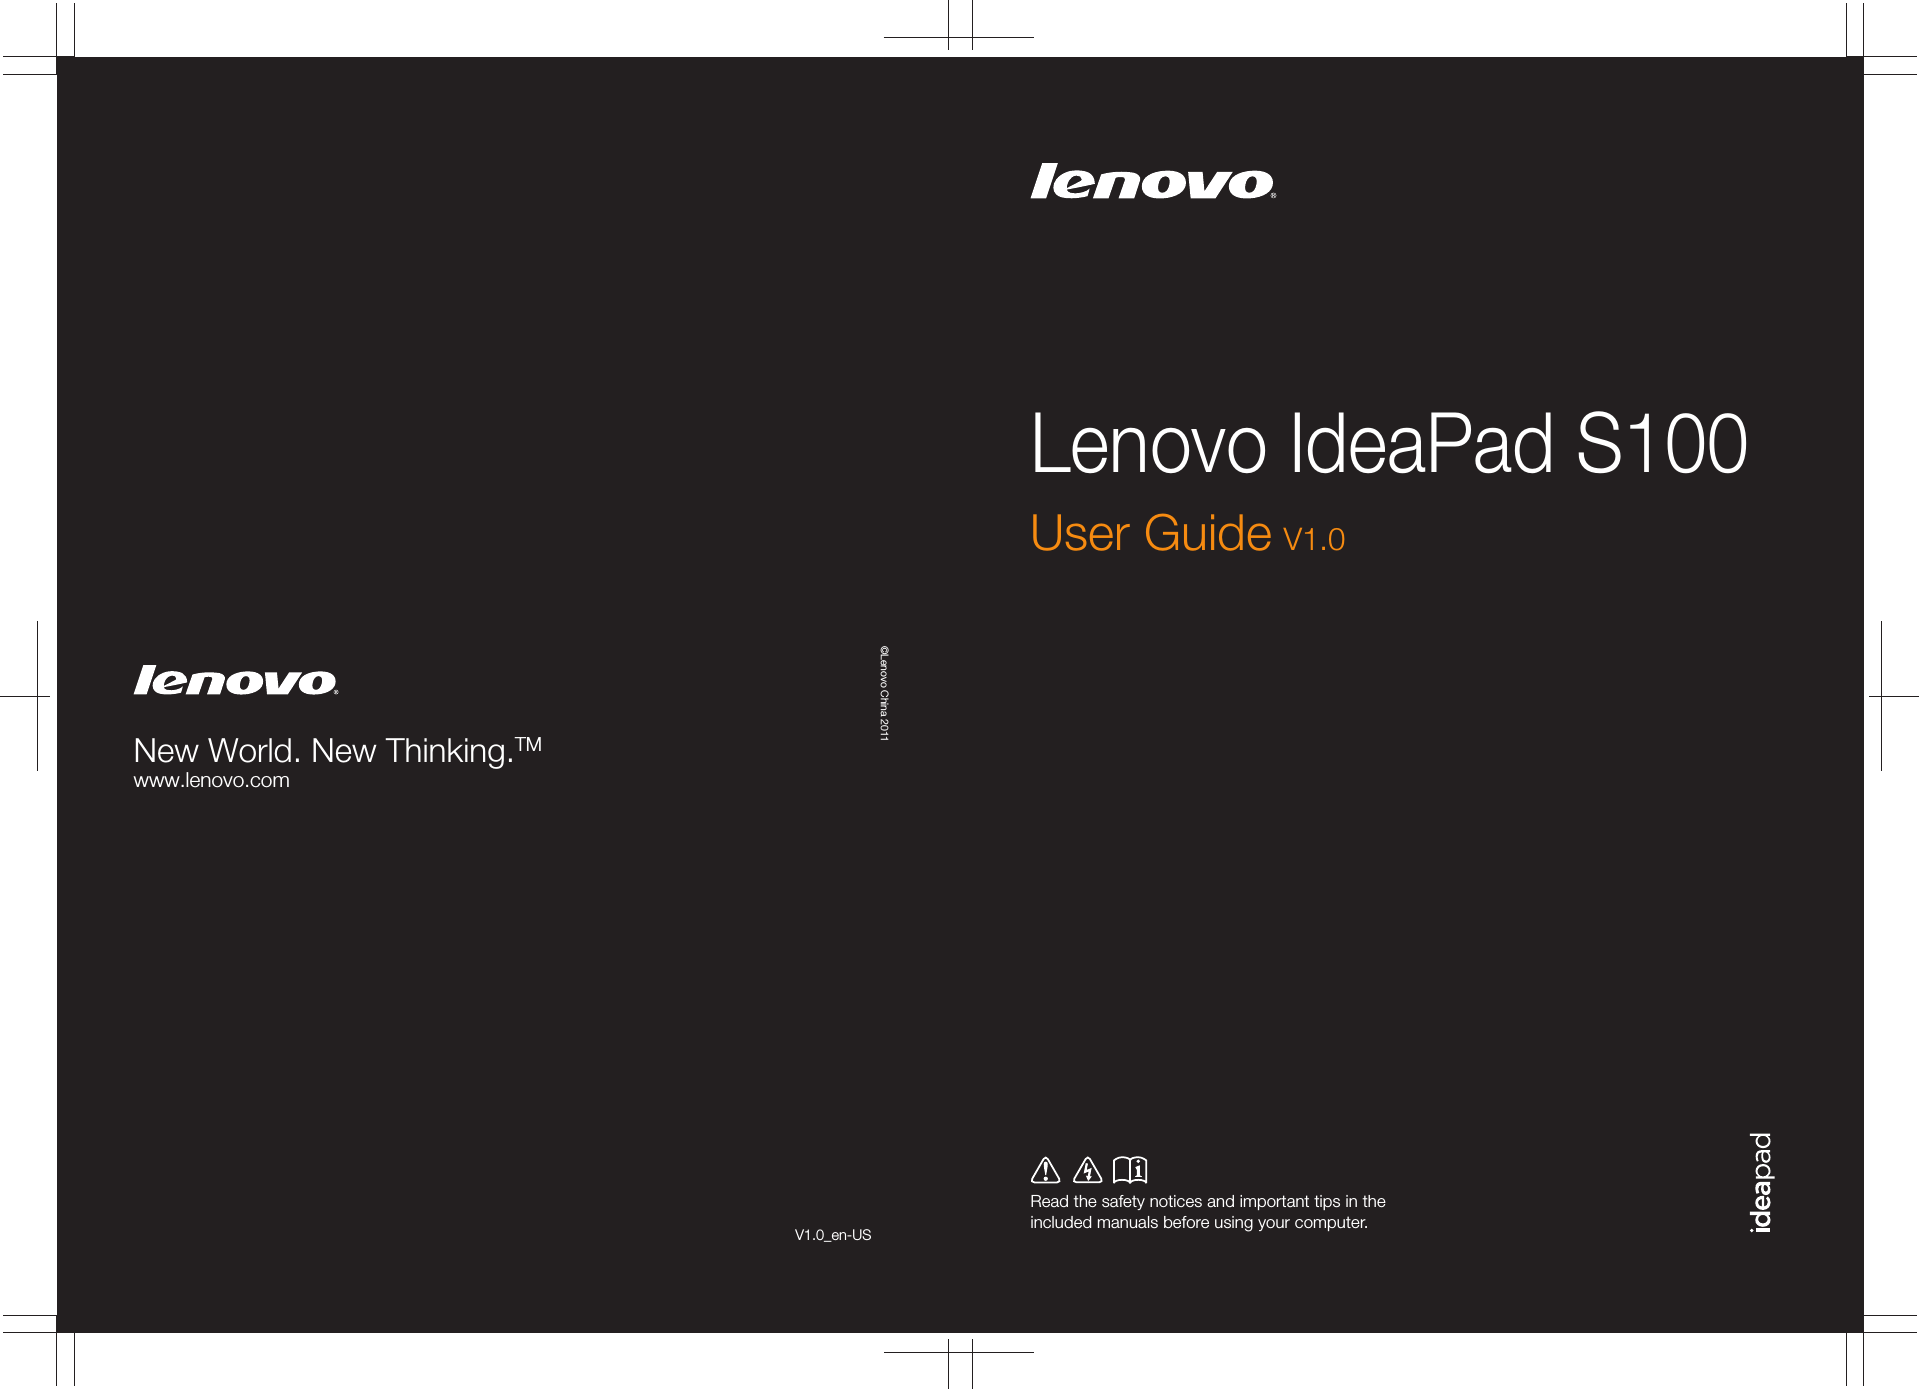 Lenovo IdeaPad S100Read the safety notices and important tips in the included manuals before using your computer.©Lenovo China 2011New World. New Thinking.TMwww.lenovo.comUser Guide V1.0V1.0_en-US